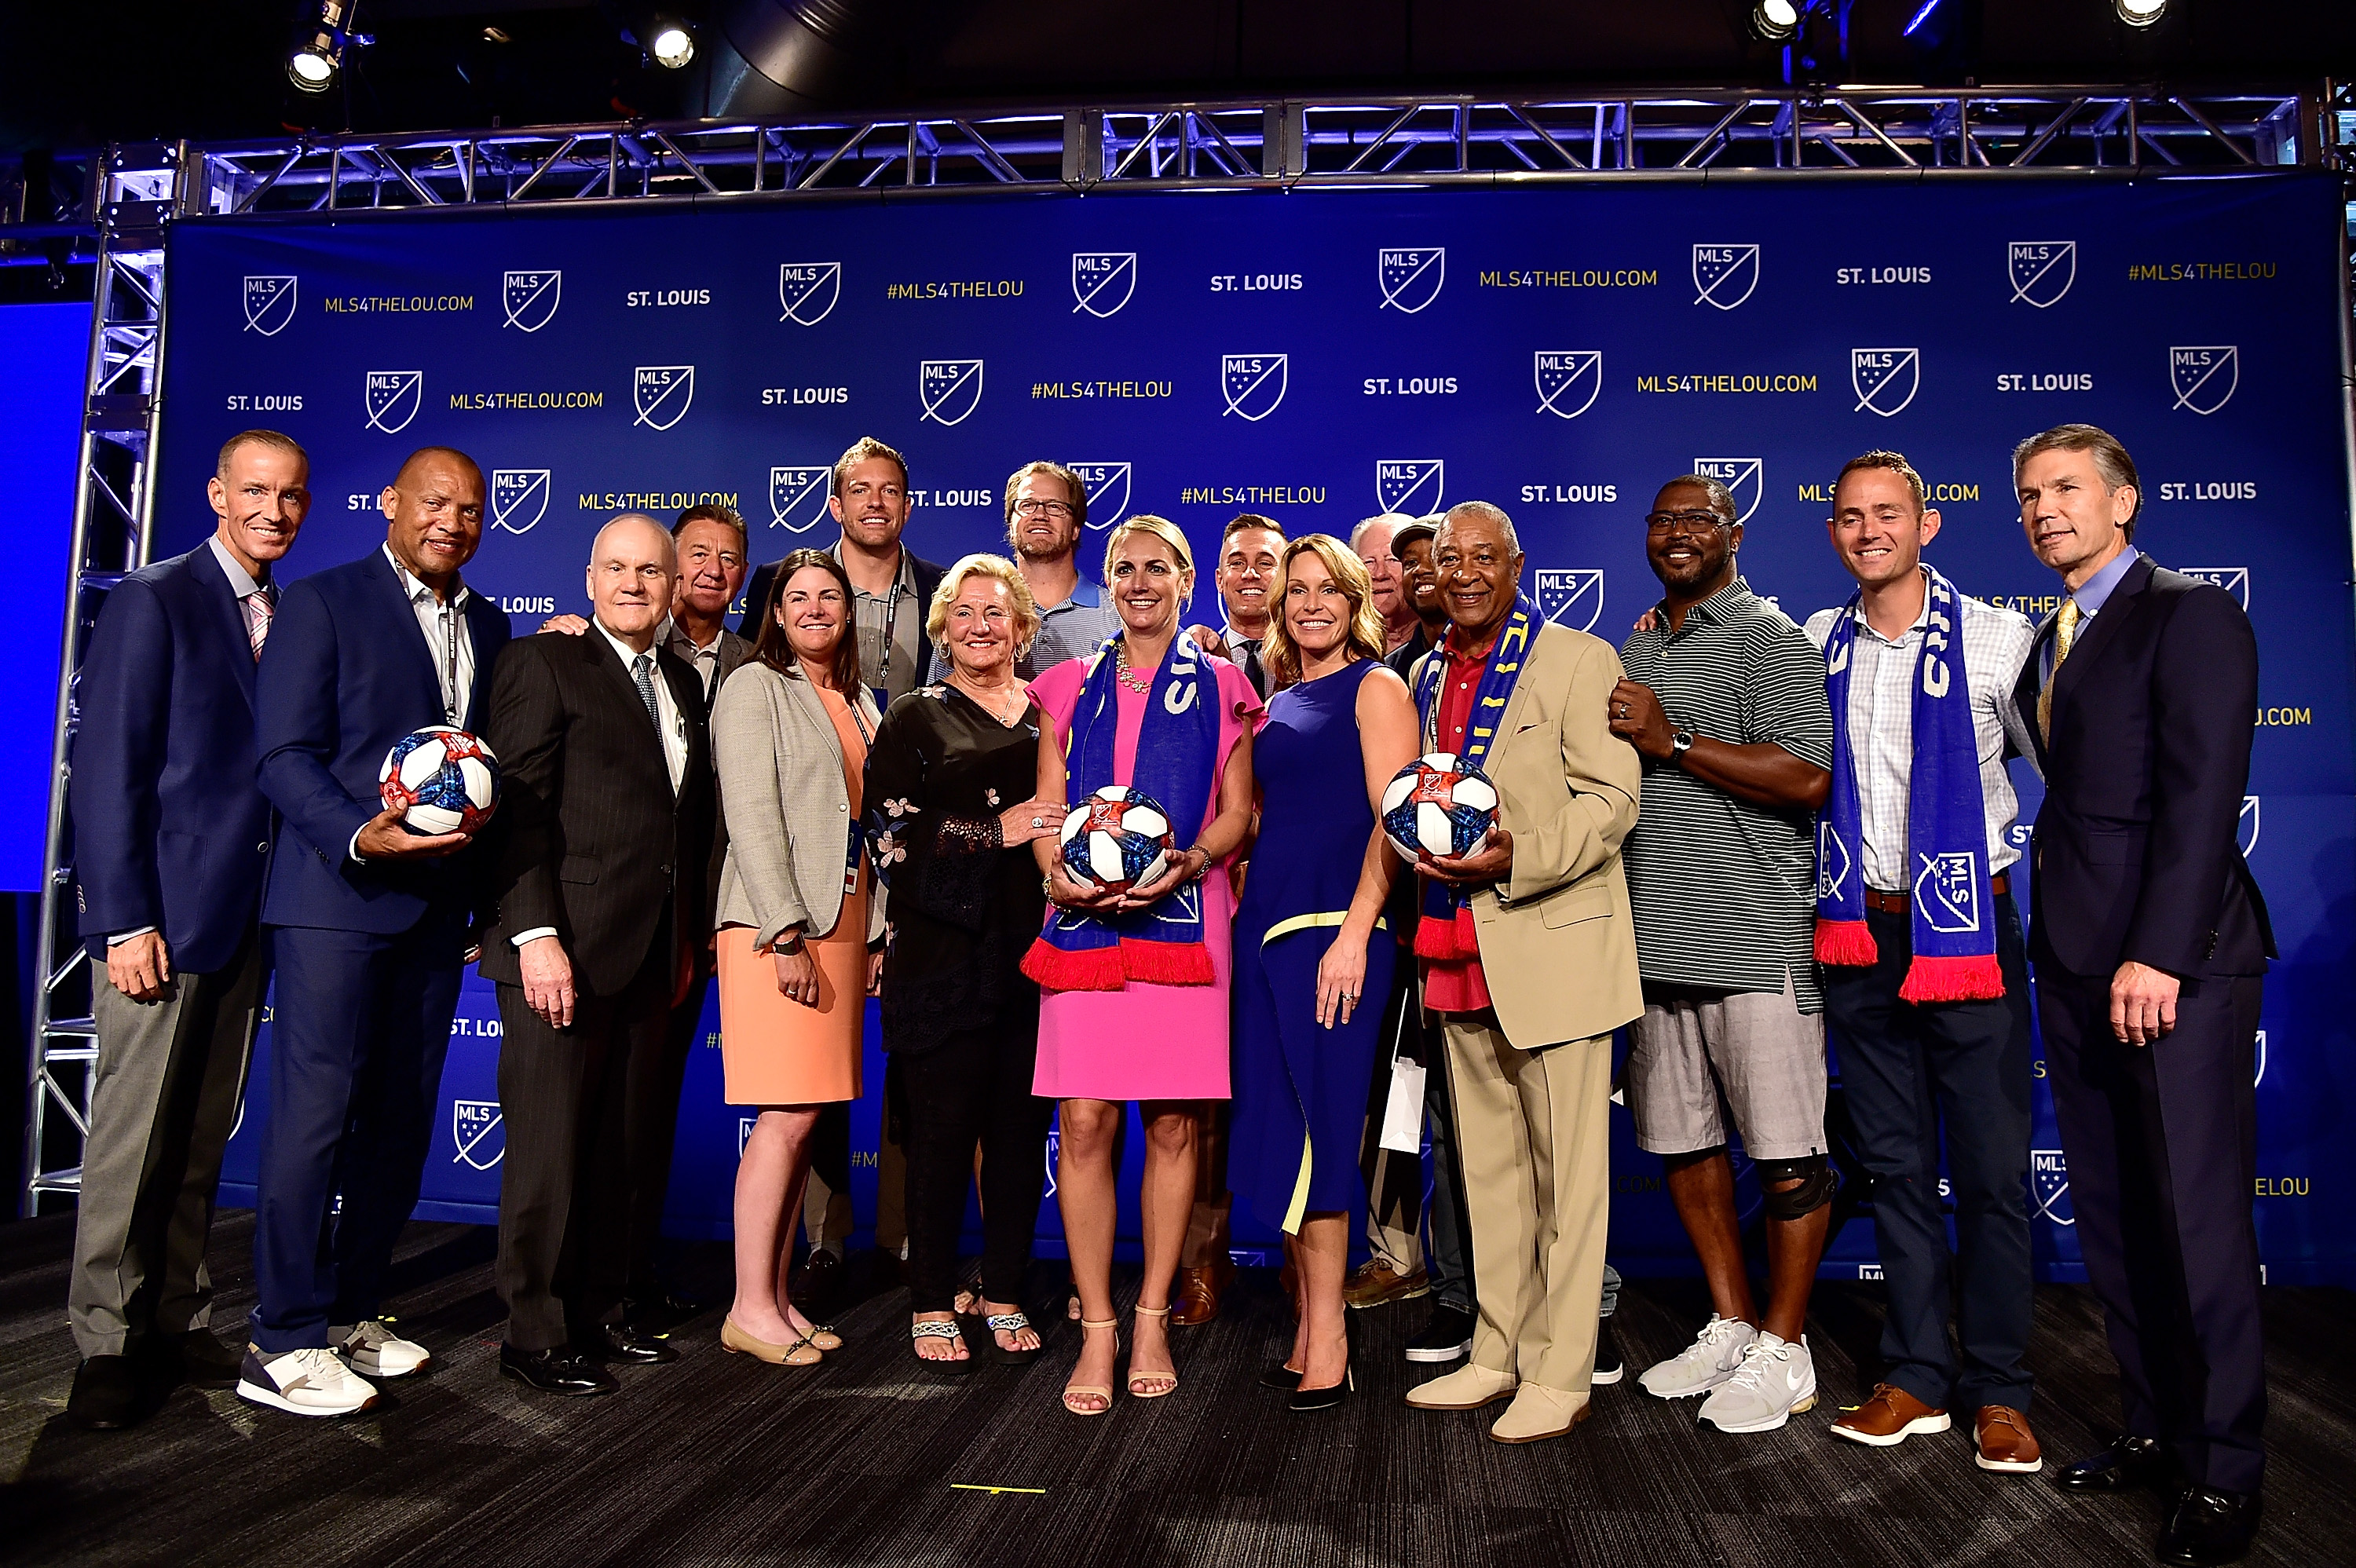 MLS: MLS4TheLou-St. Louis Press Conference